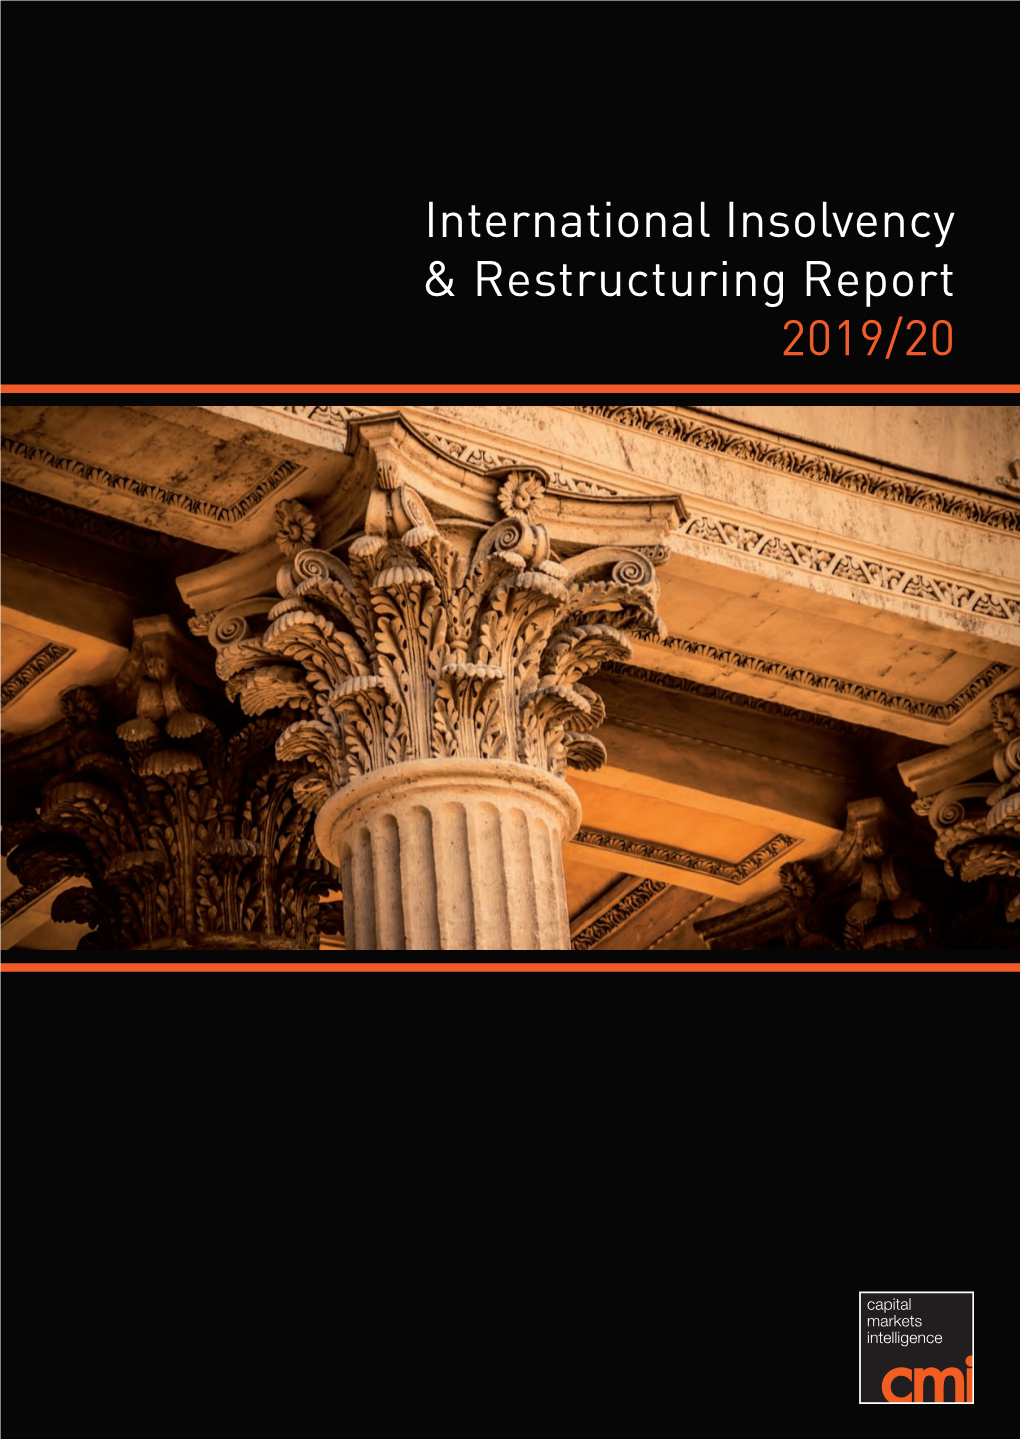 International Insolvency & Restructuring Report 2019/20